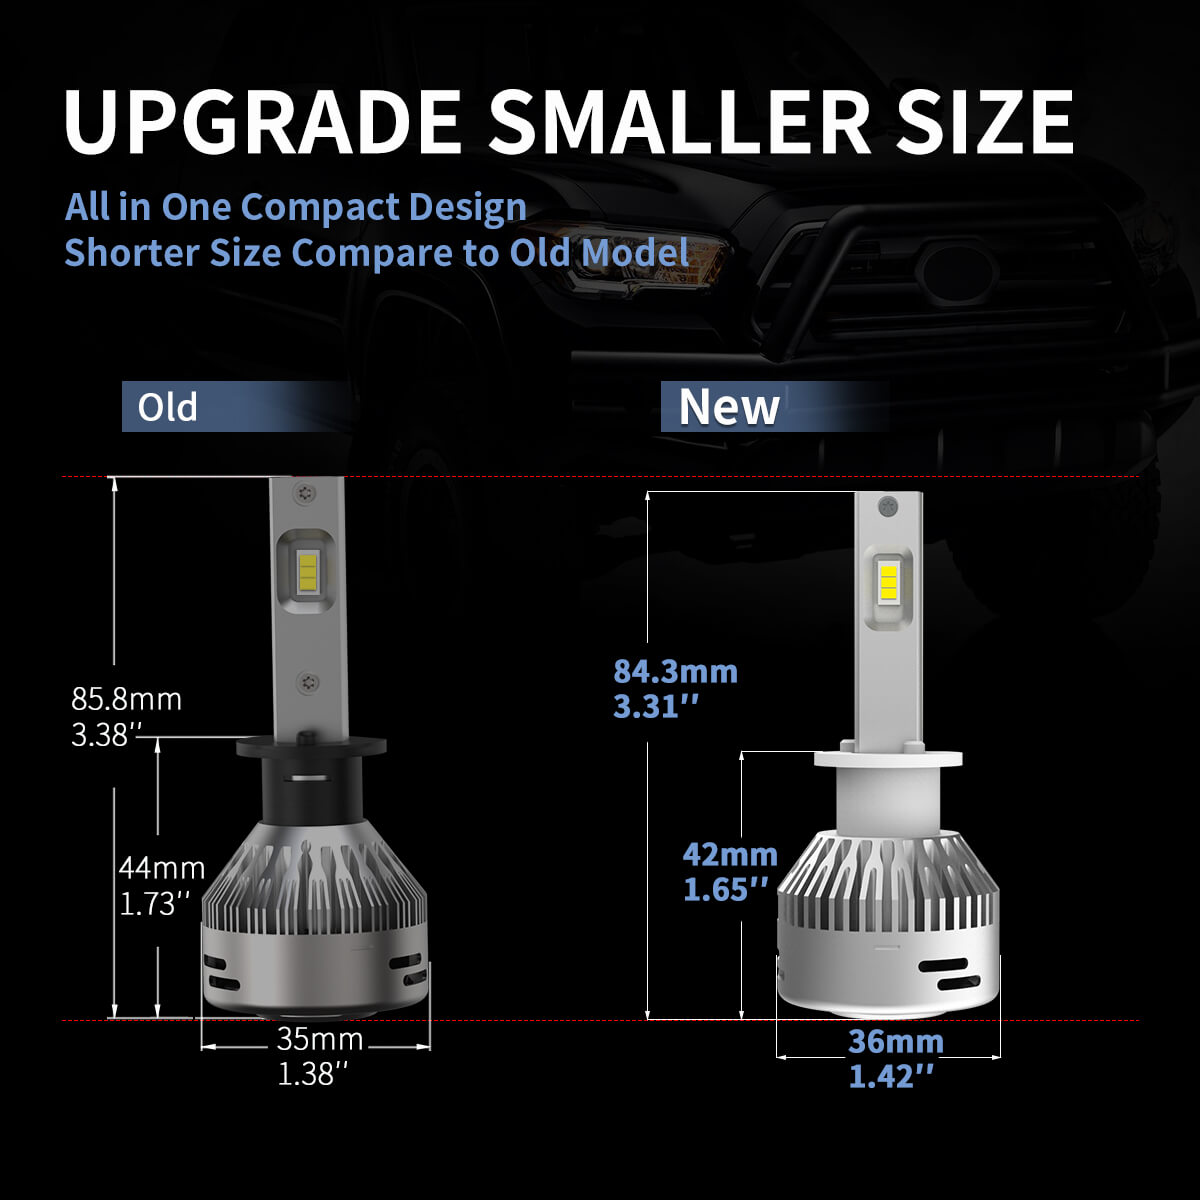 GLF H1 LED Headlight Bulb,High Beam,Low Beam,Halogen Replace Kit,12000lm  6K,8 Sided LED CREE Chips,Plug and Play,New Gen